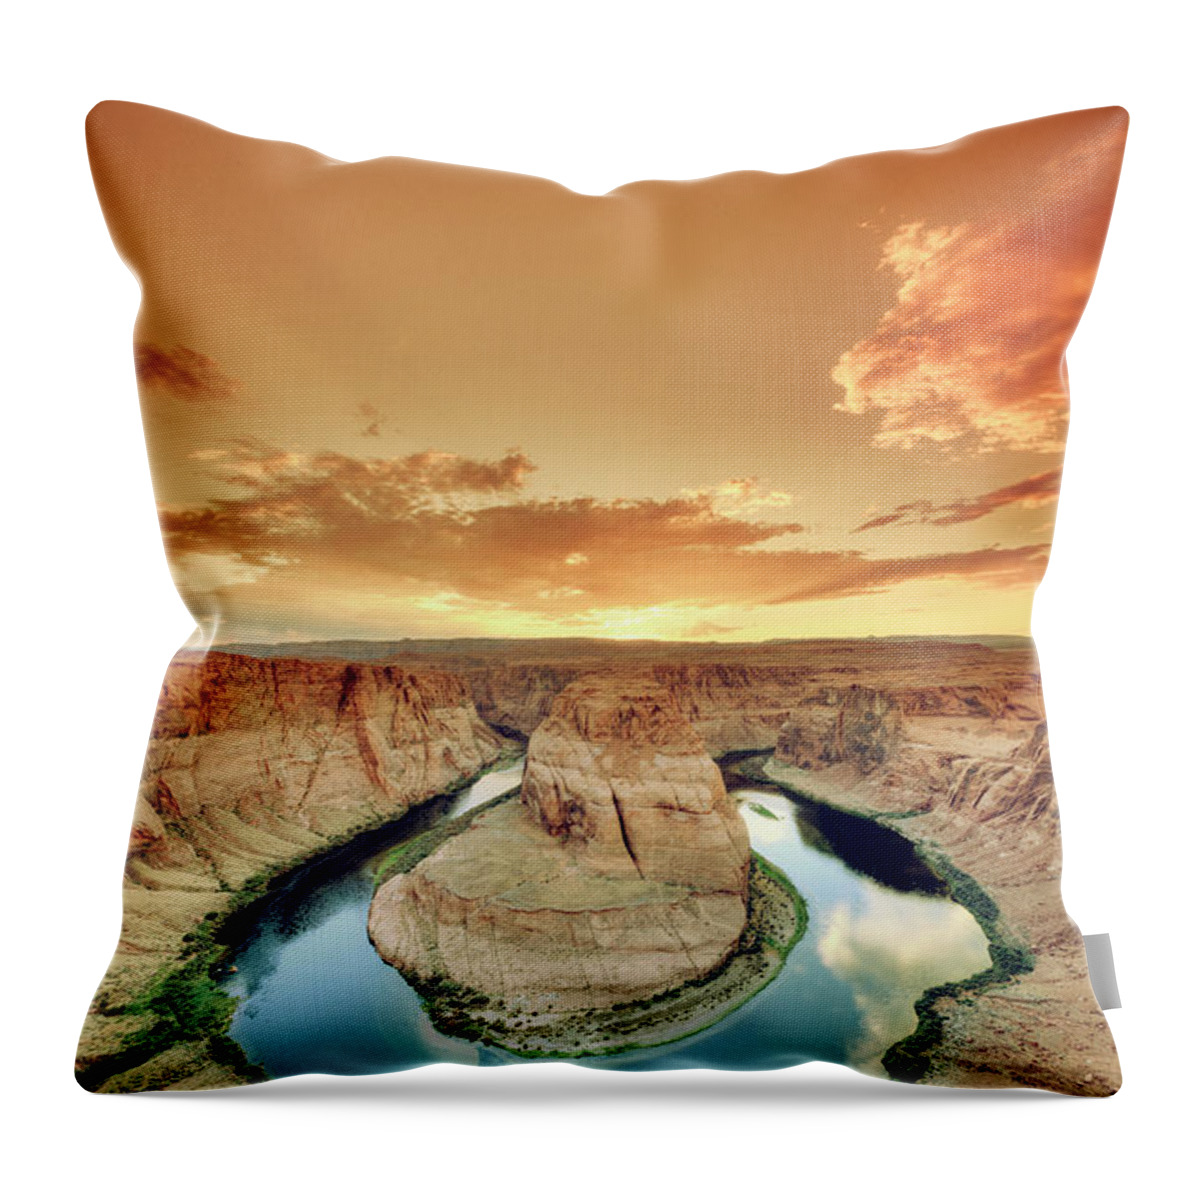 Tranquility Throw Pillow featuring the photograph Horseshoe Bend Caynon by Michele Falzone